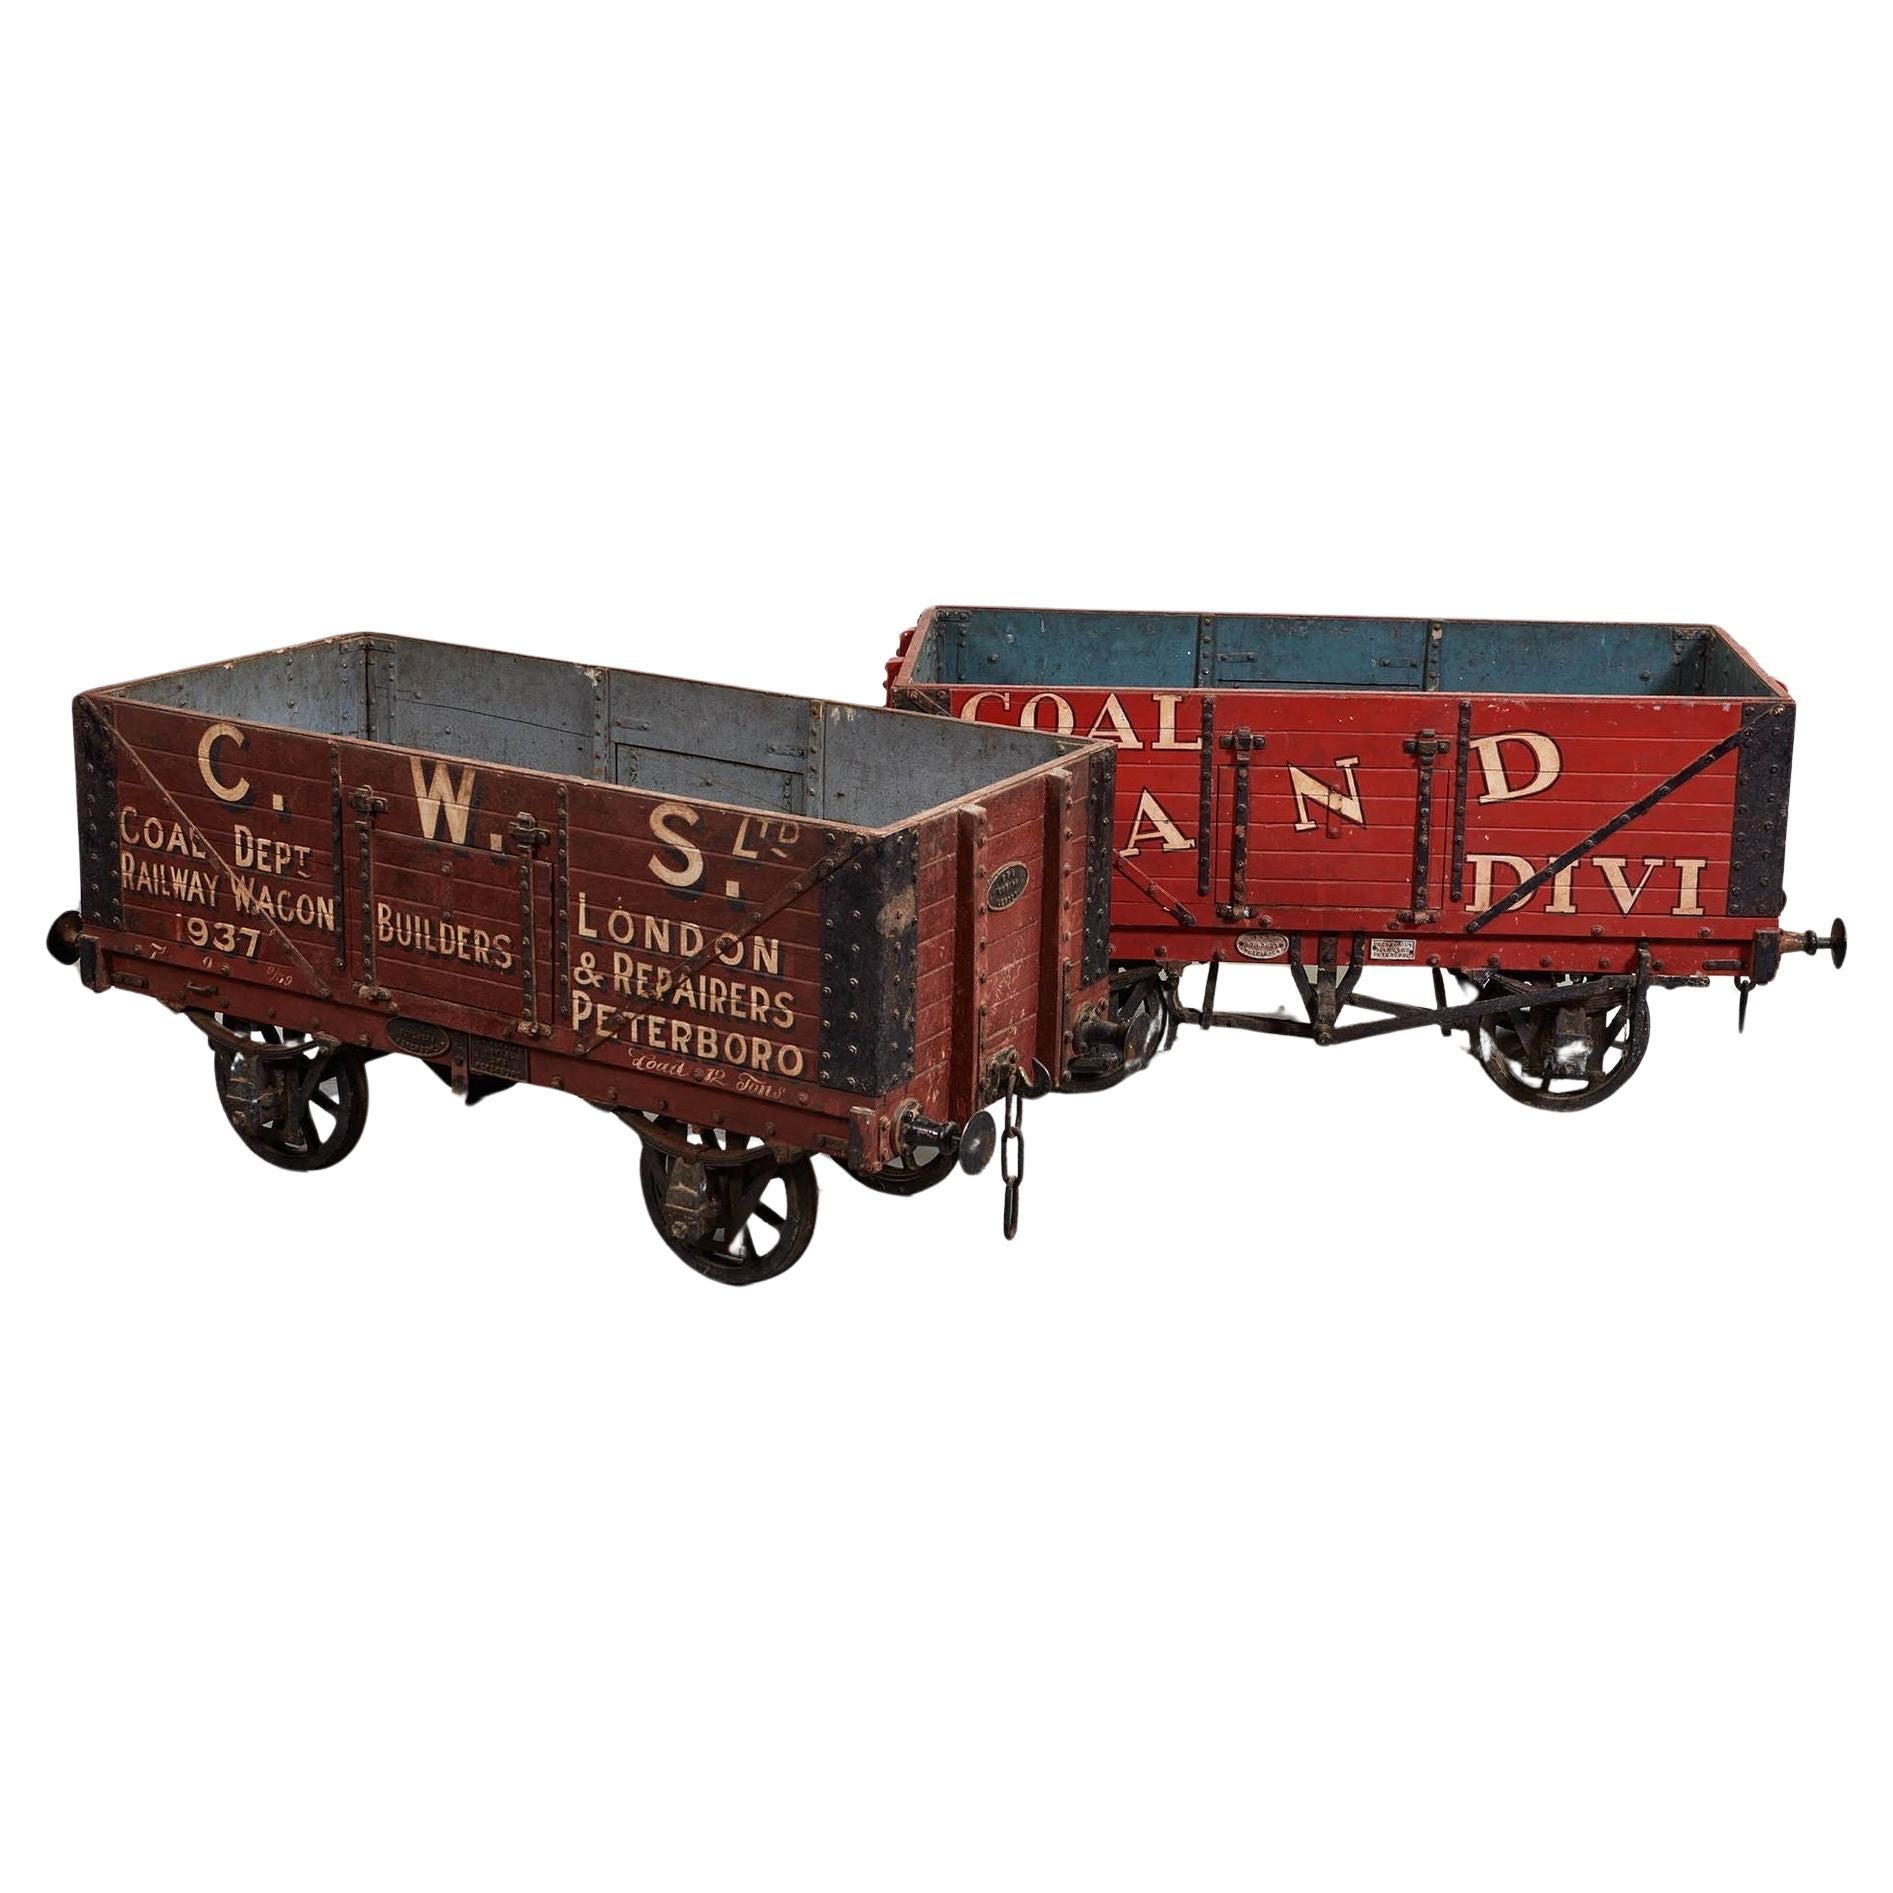 Large Scale Models of Railway Ore Carts For Sale